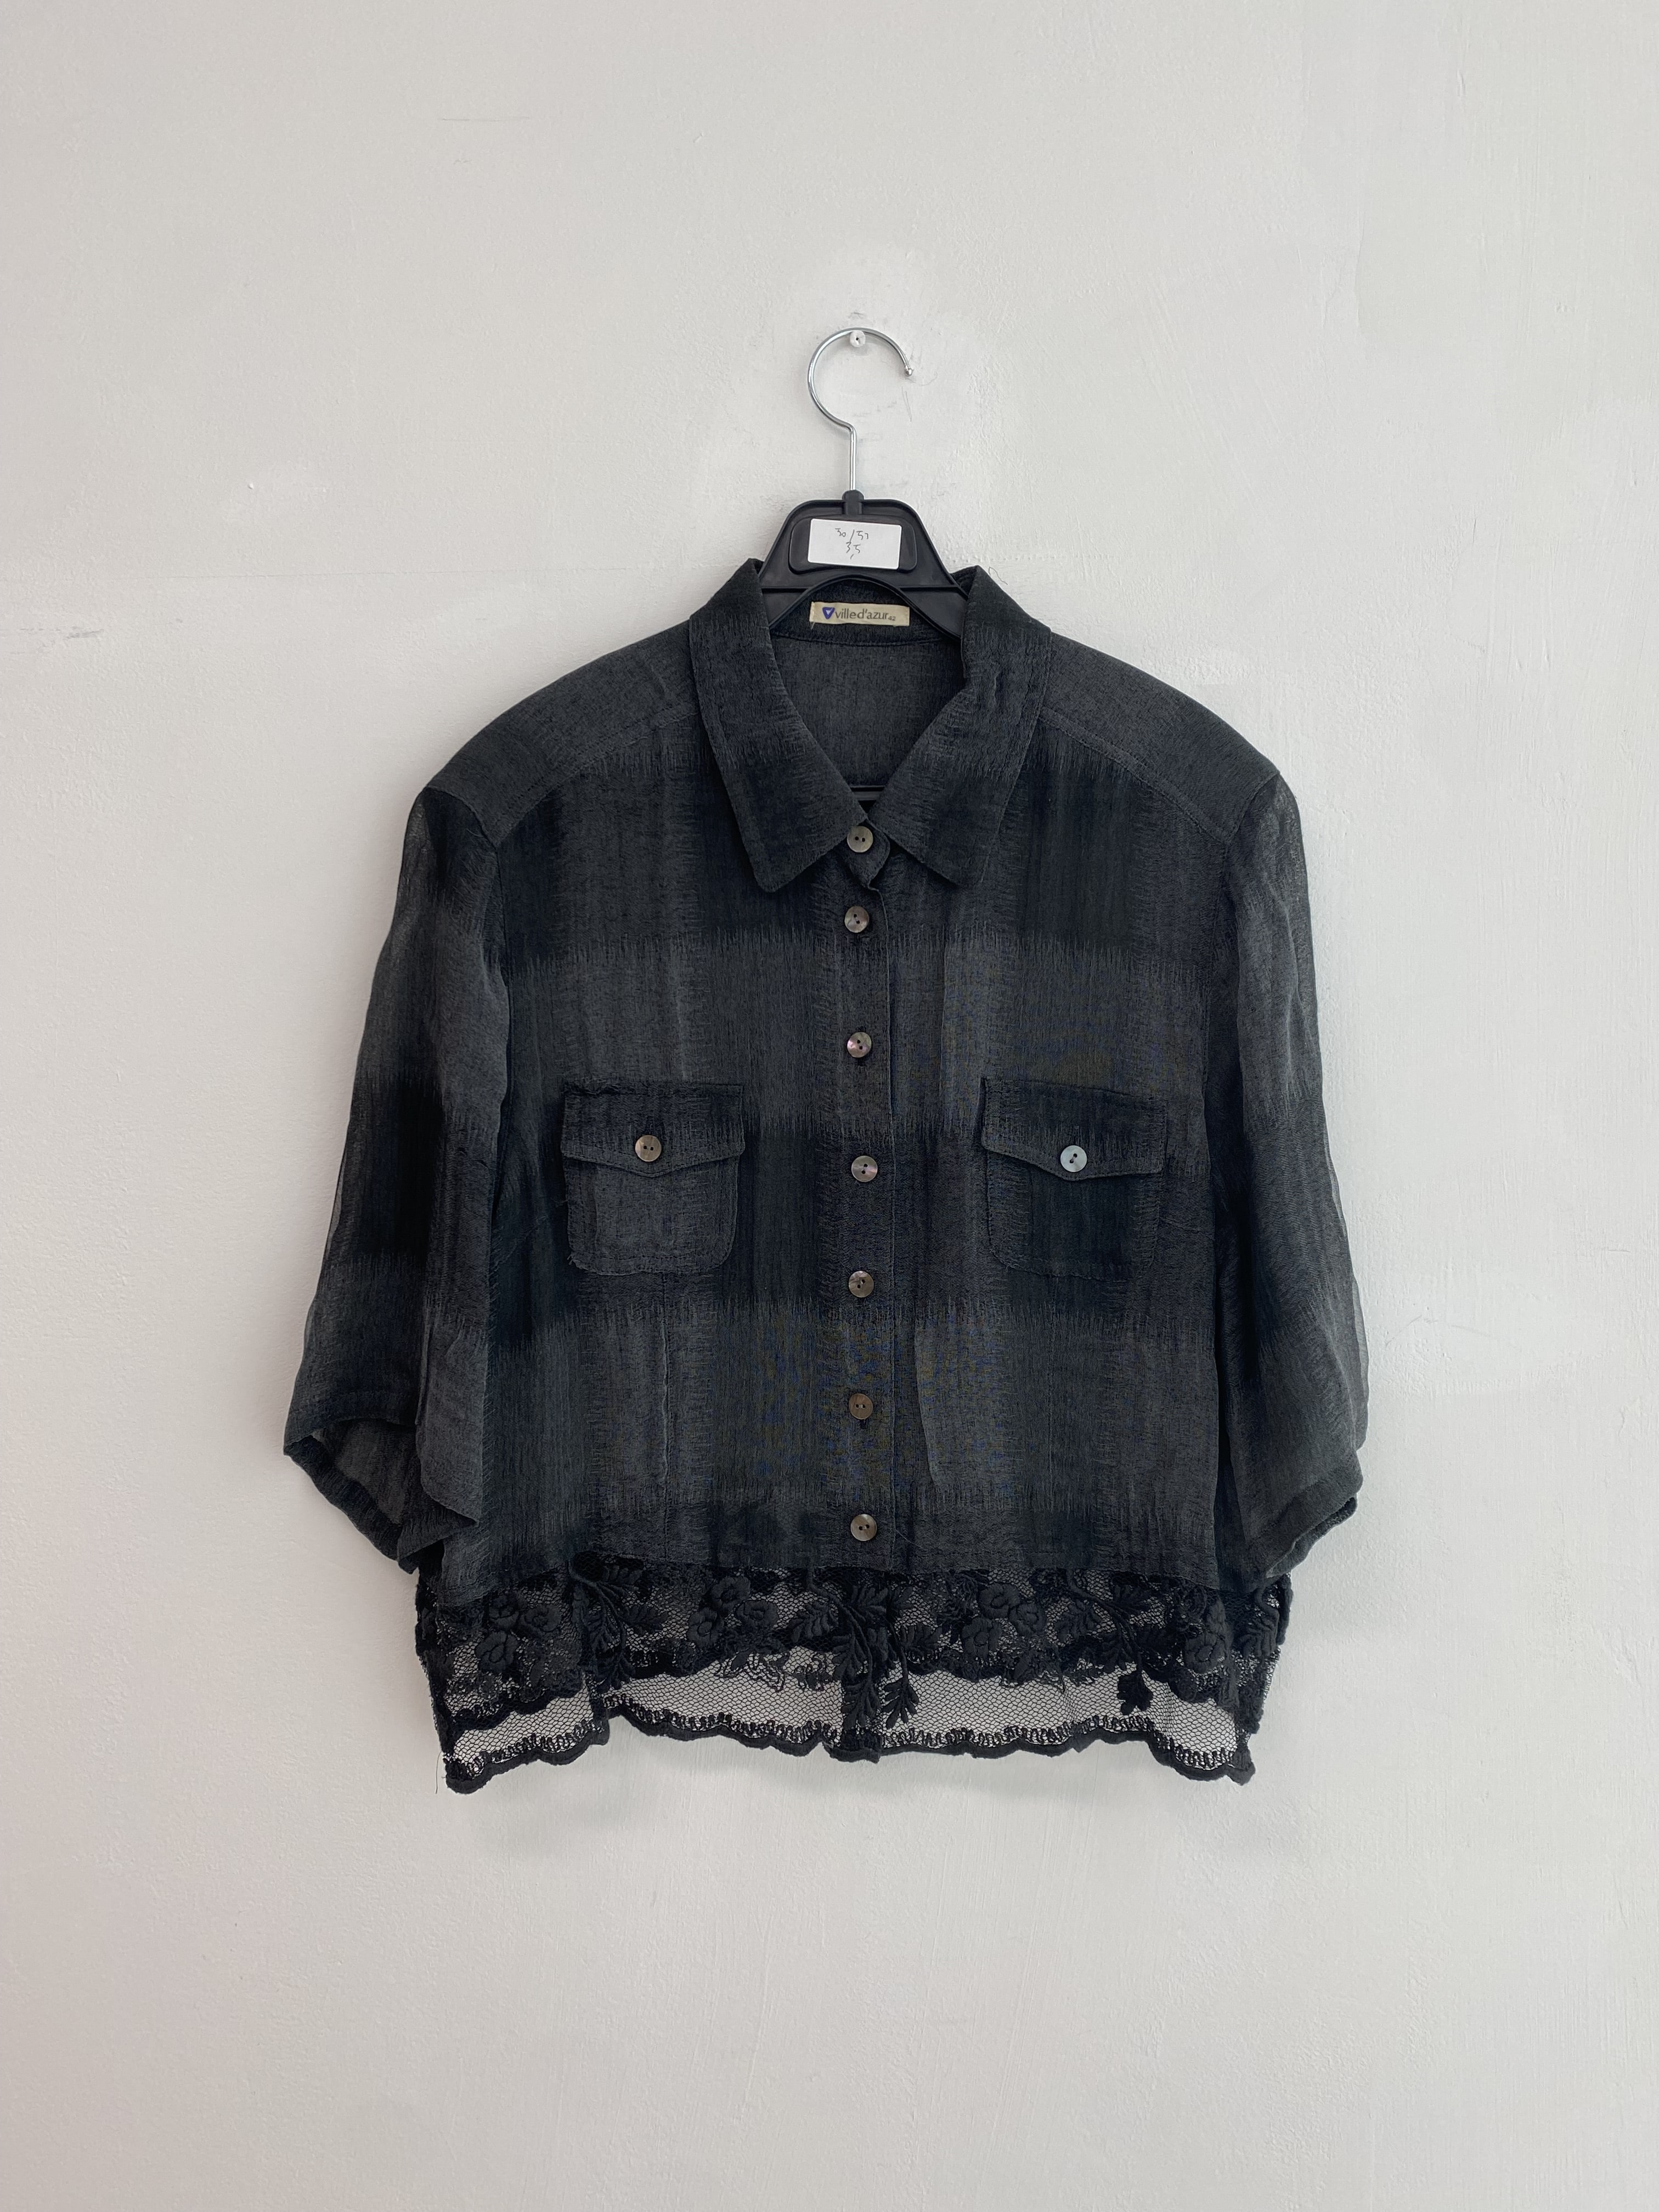 Black check lace point see-through shirt blouse